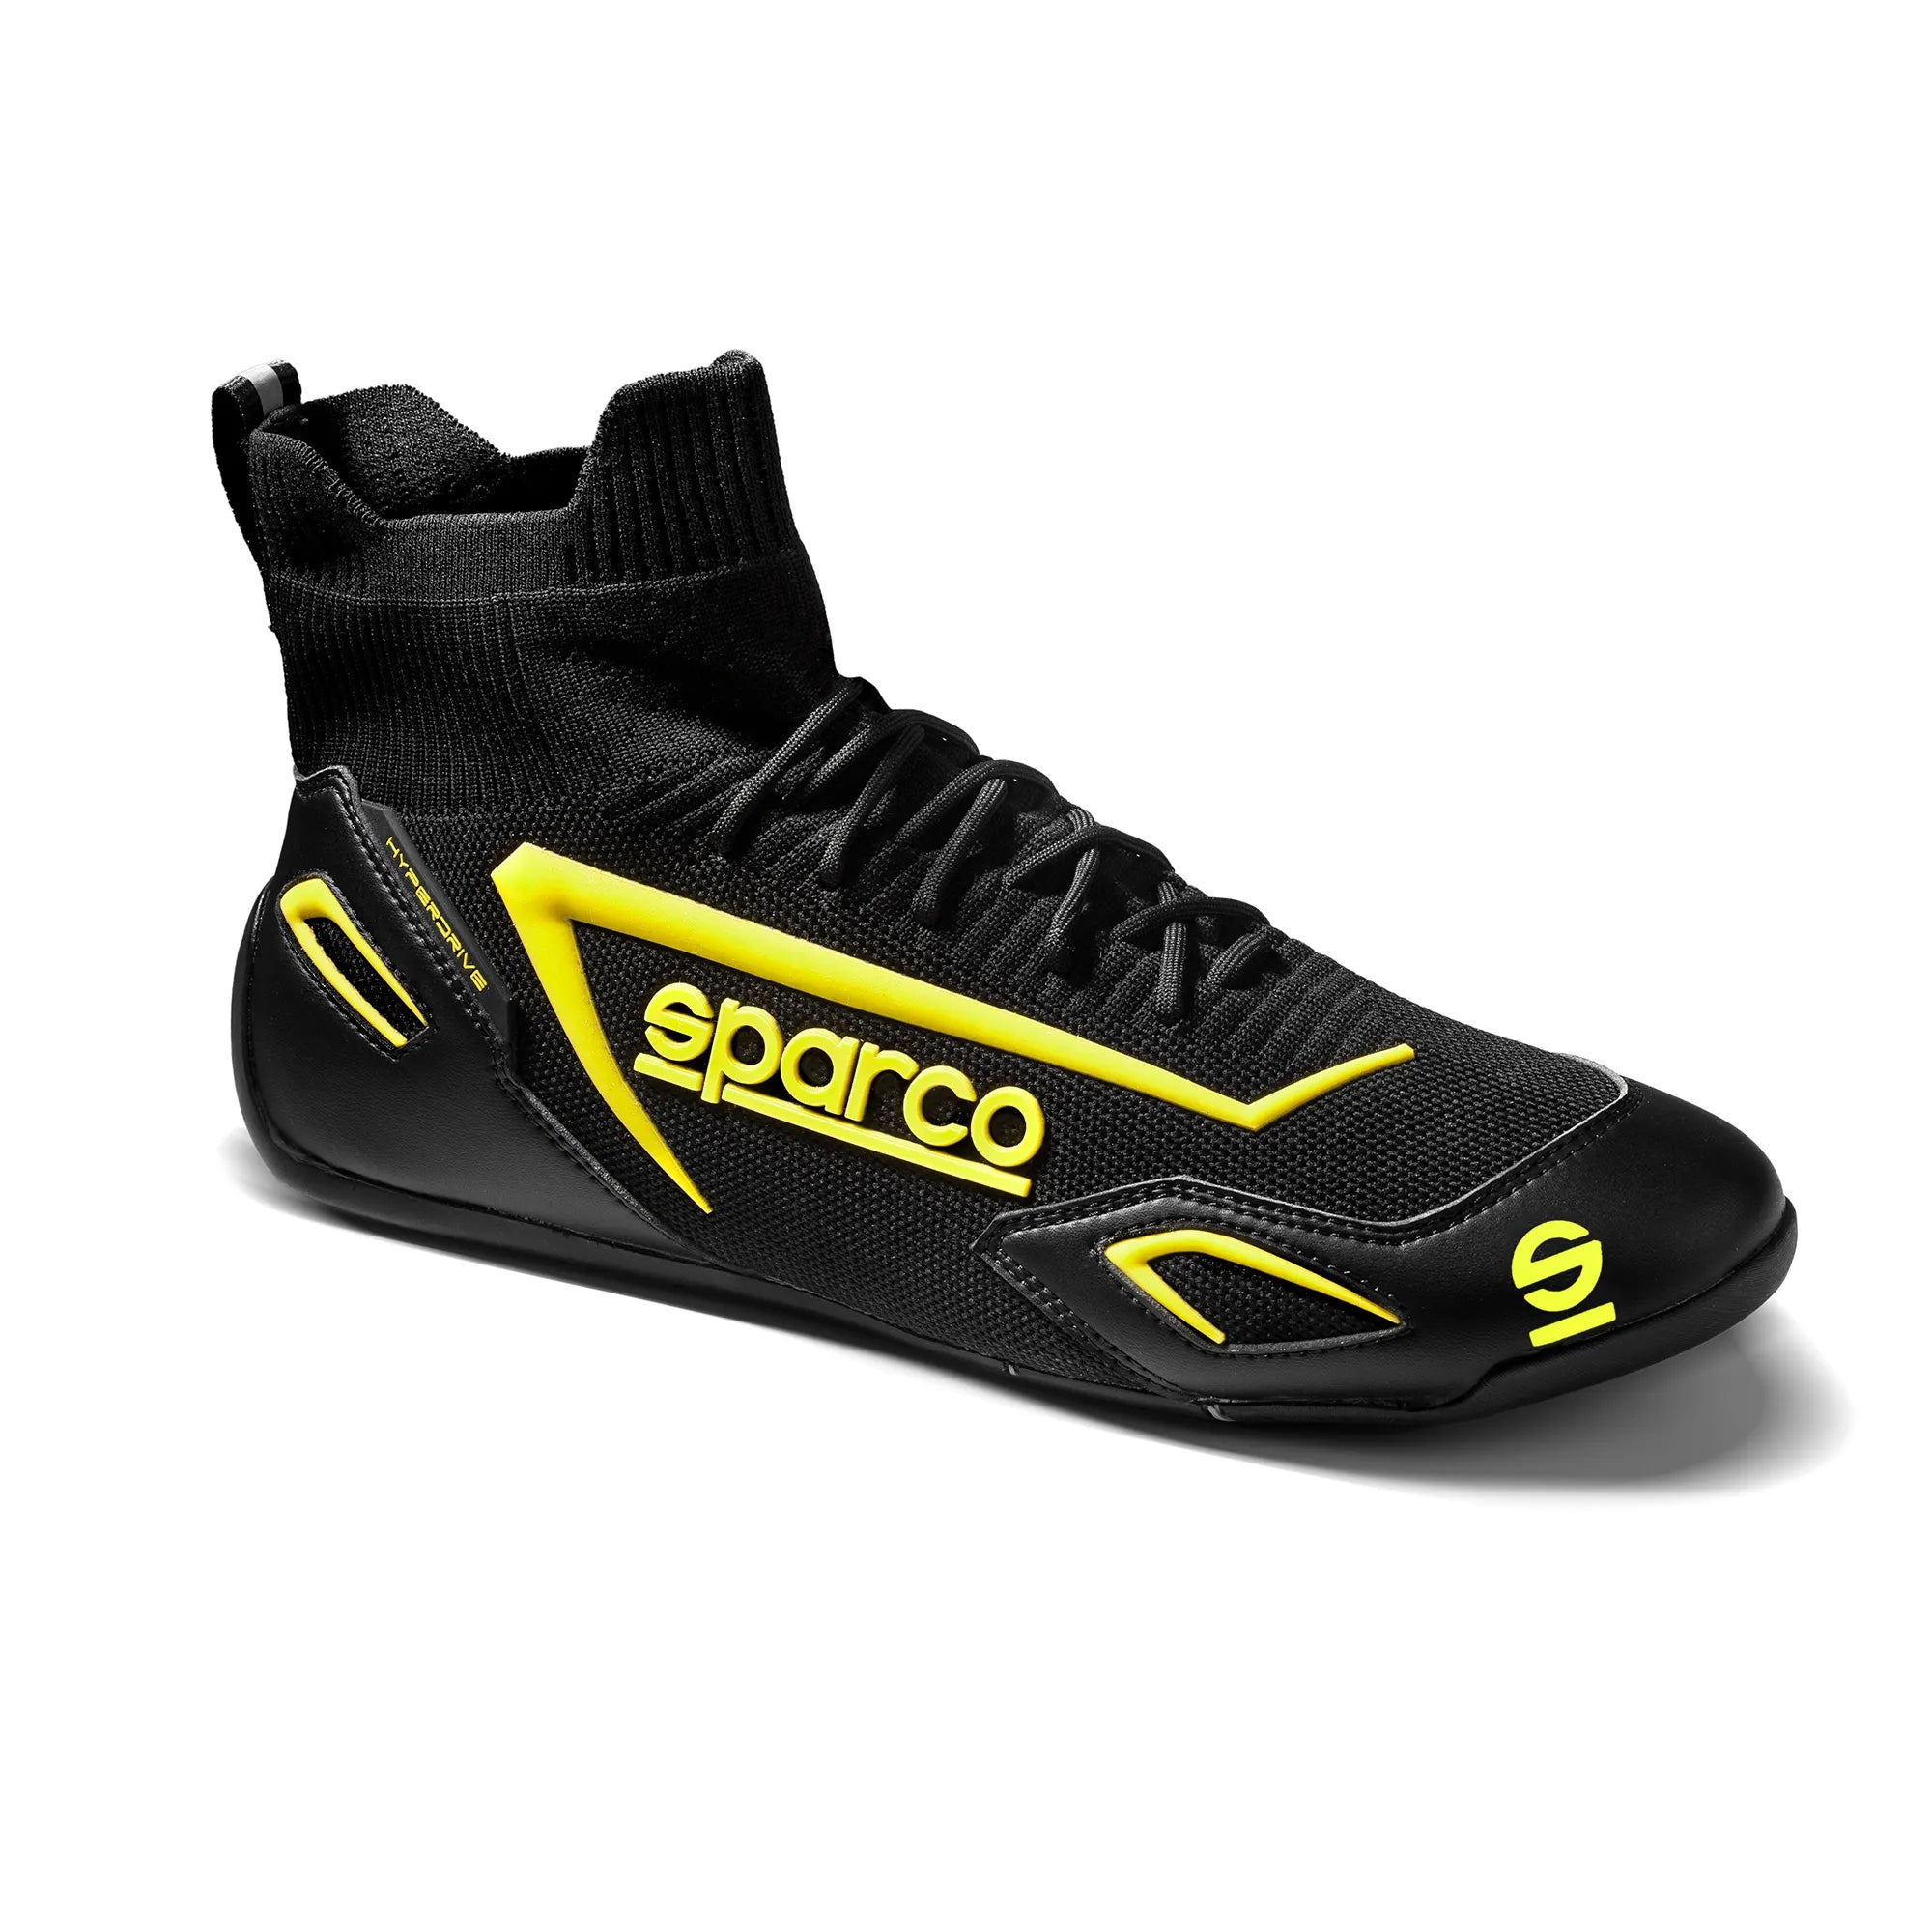 SPARCO 00129342NRGF Gaming sim racing shoes HYPERDRIVE, black/yellow, size 42 Photo-1 